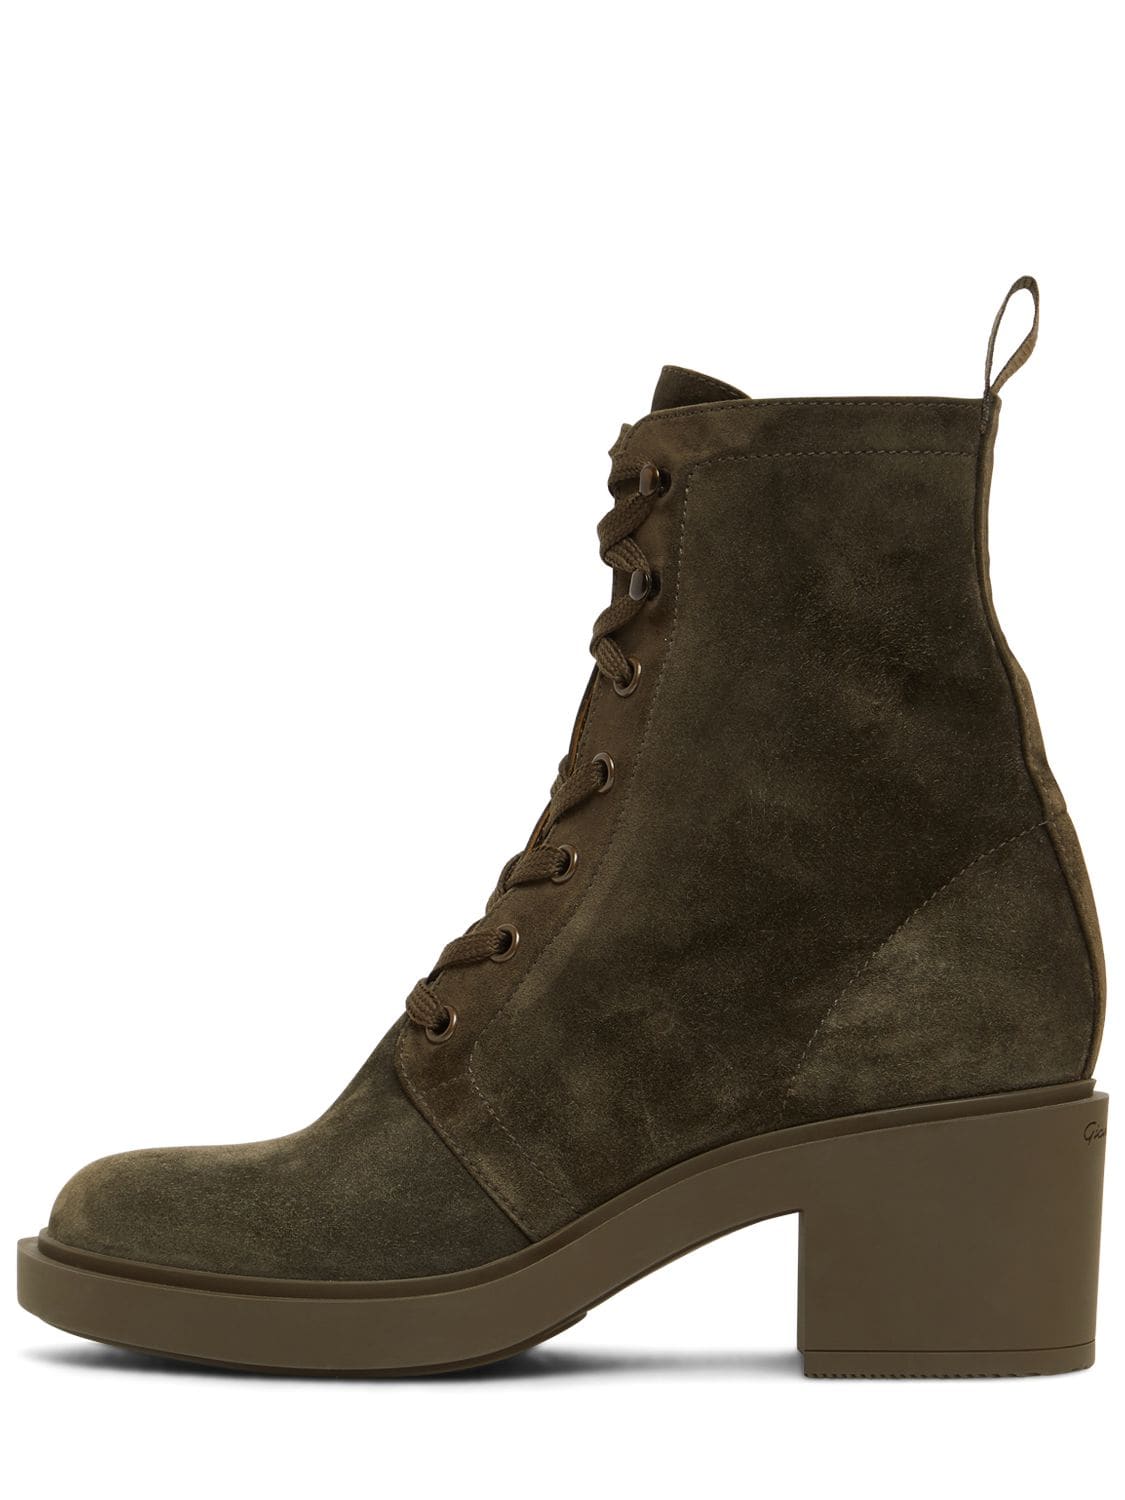 Gianvito Rossi 60mm Foster Suede Ankle Boots In Dark Olive